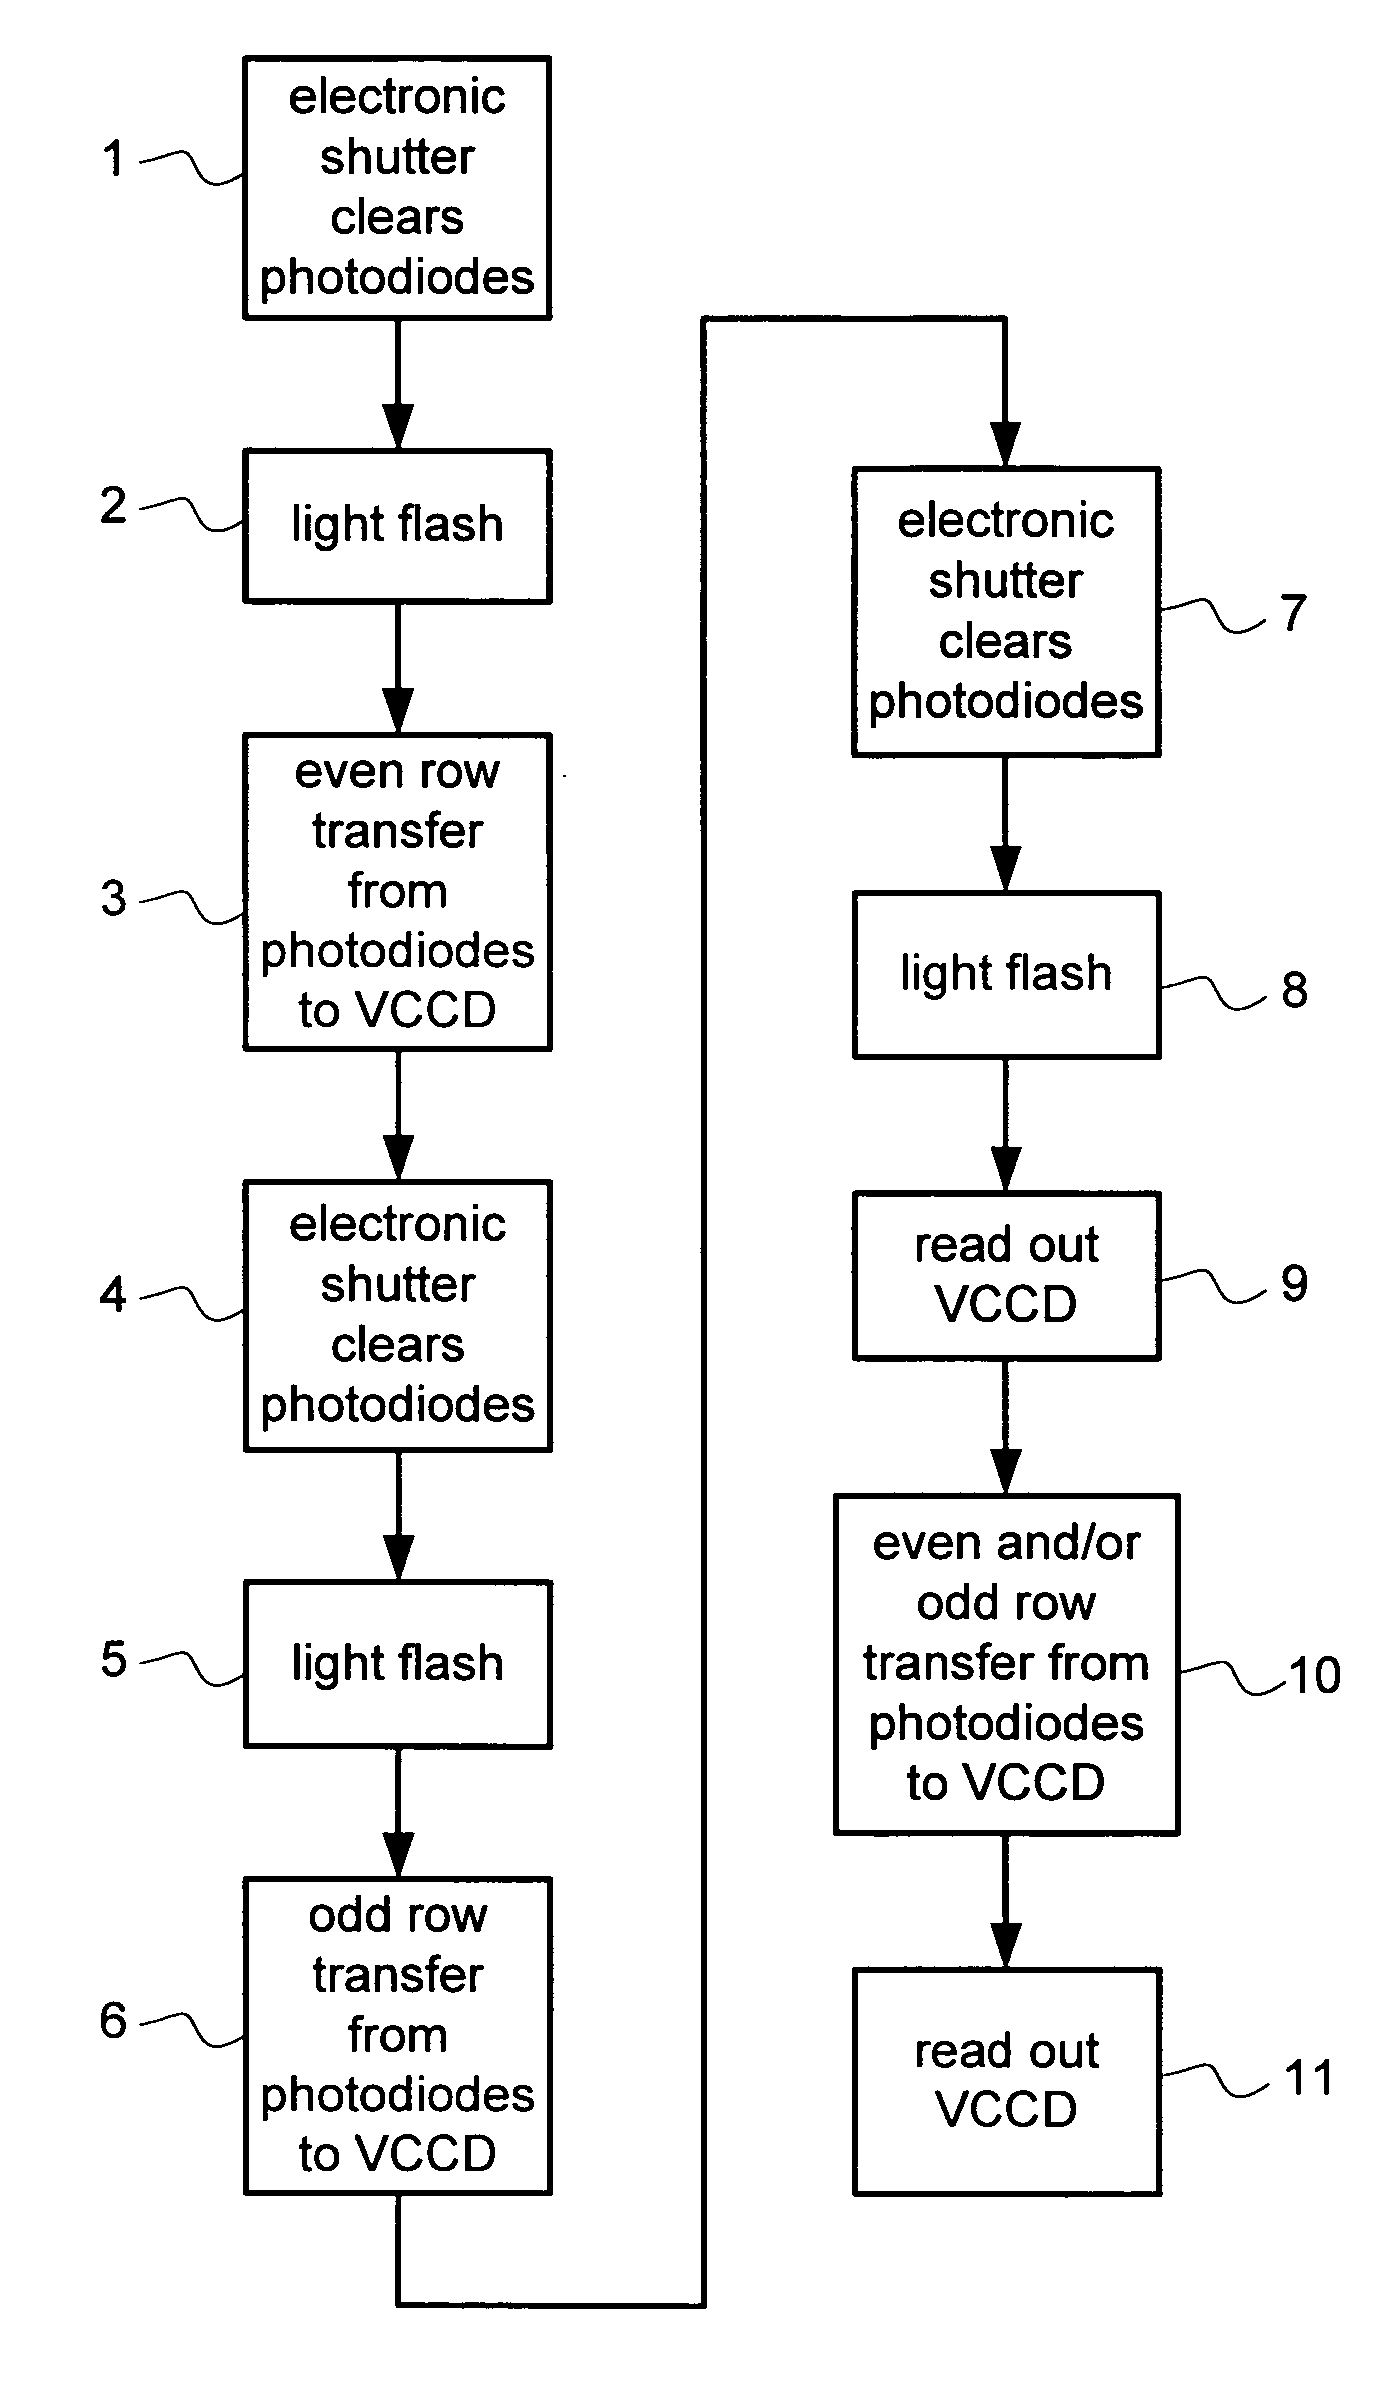 Method for capturing a sequence of images in close succession